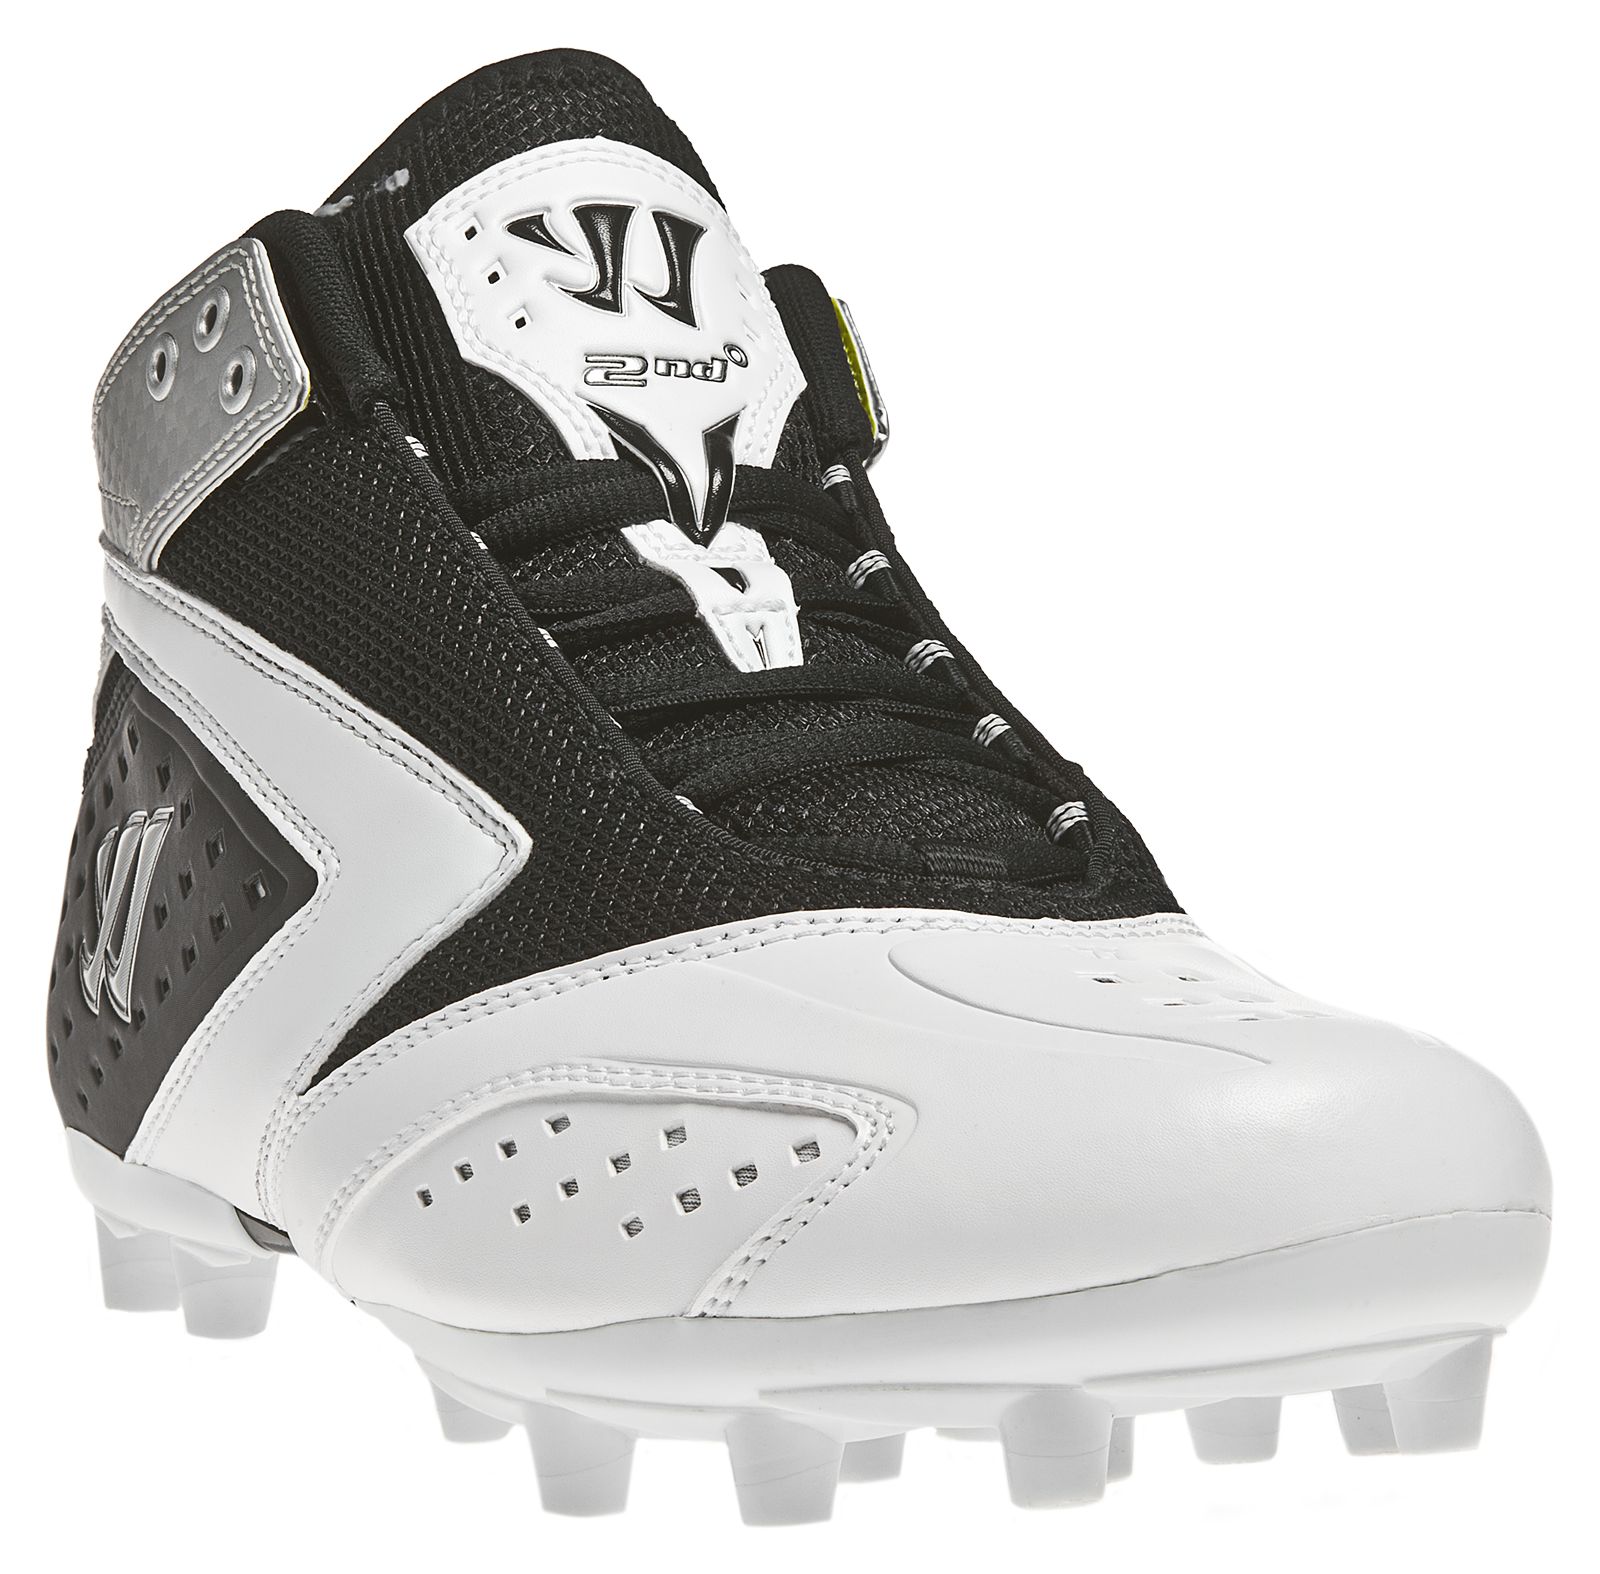 Burn 2nd Degree Cleat, Black with White & Silver image number 2